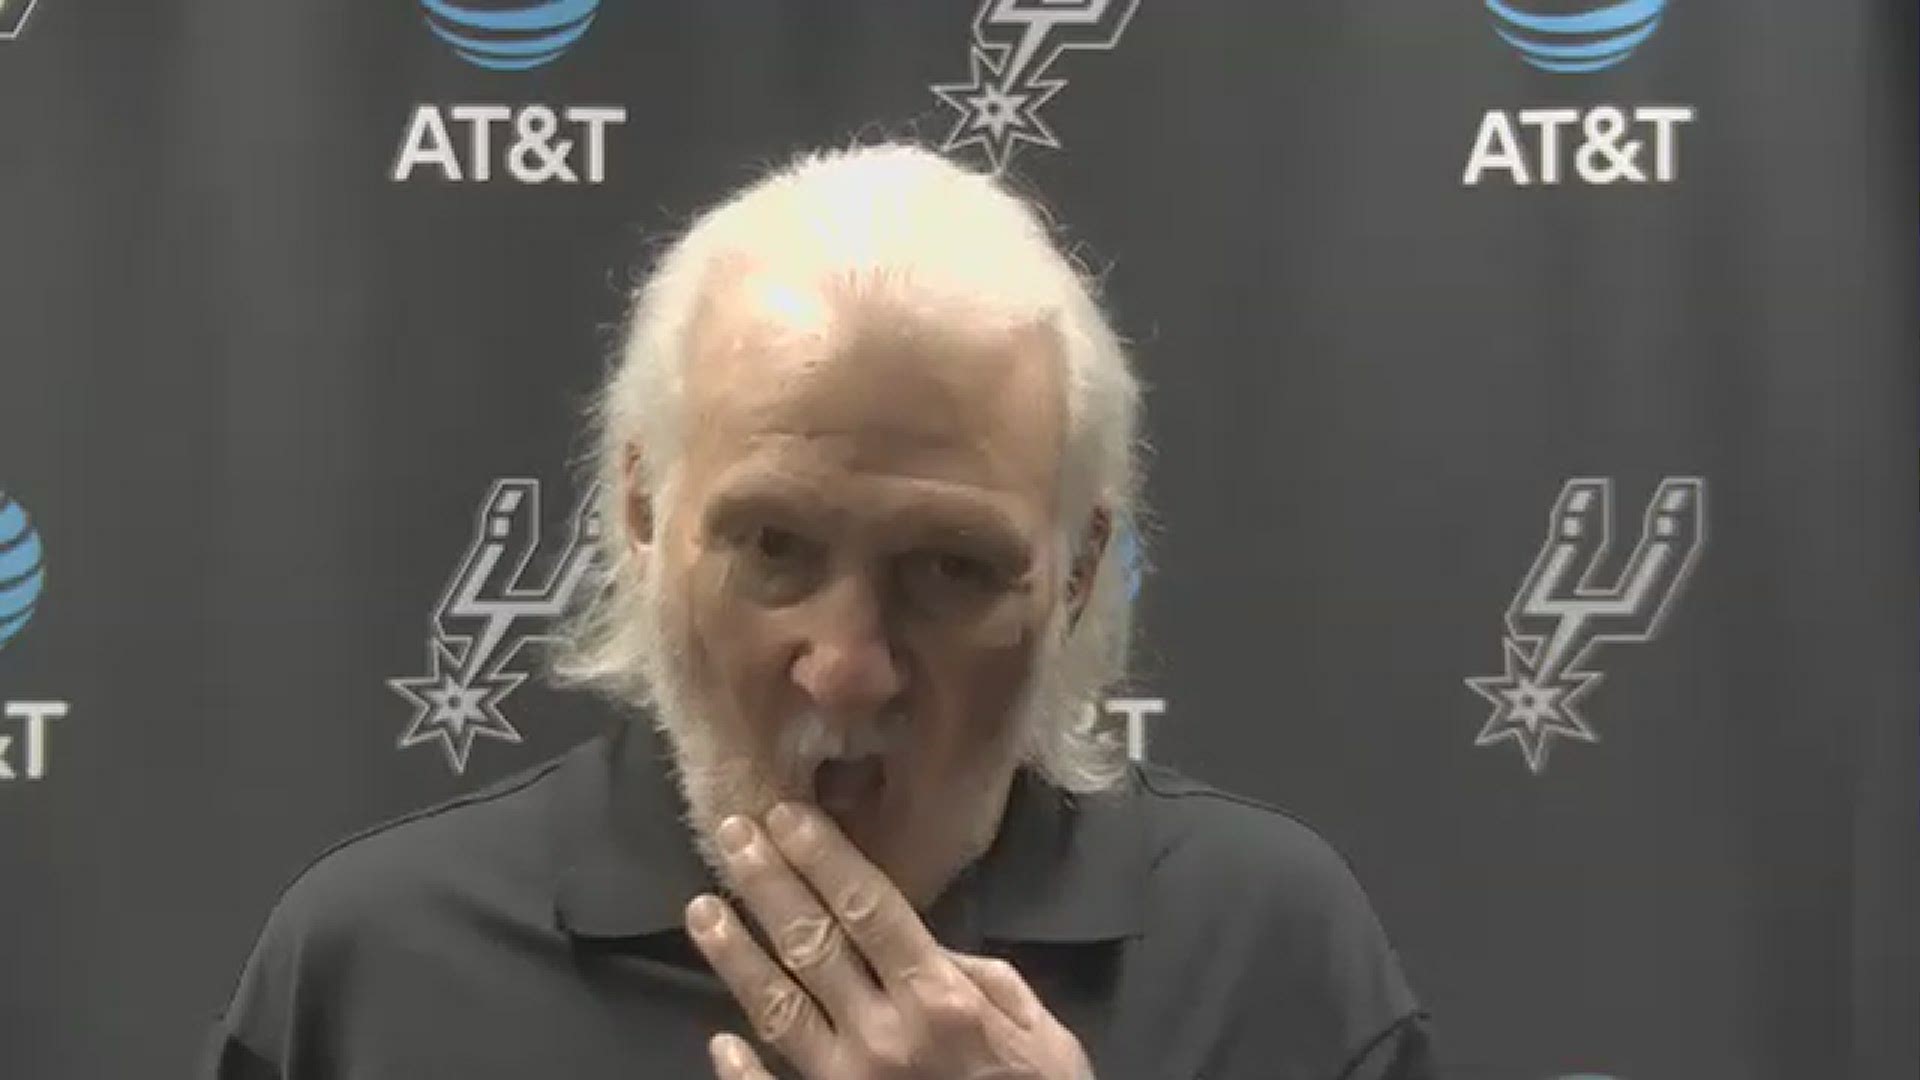 Popovich said he was pleased that his team sustained their effort throughout the game, even with a big lead at halftime.